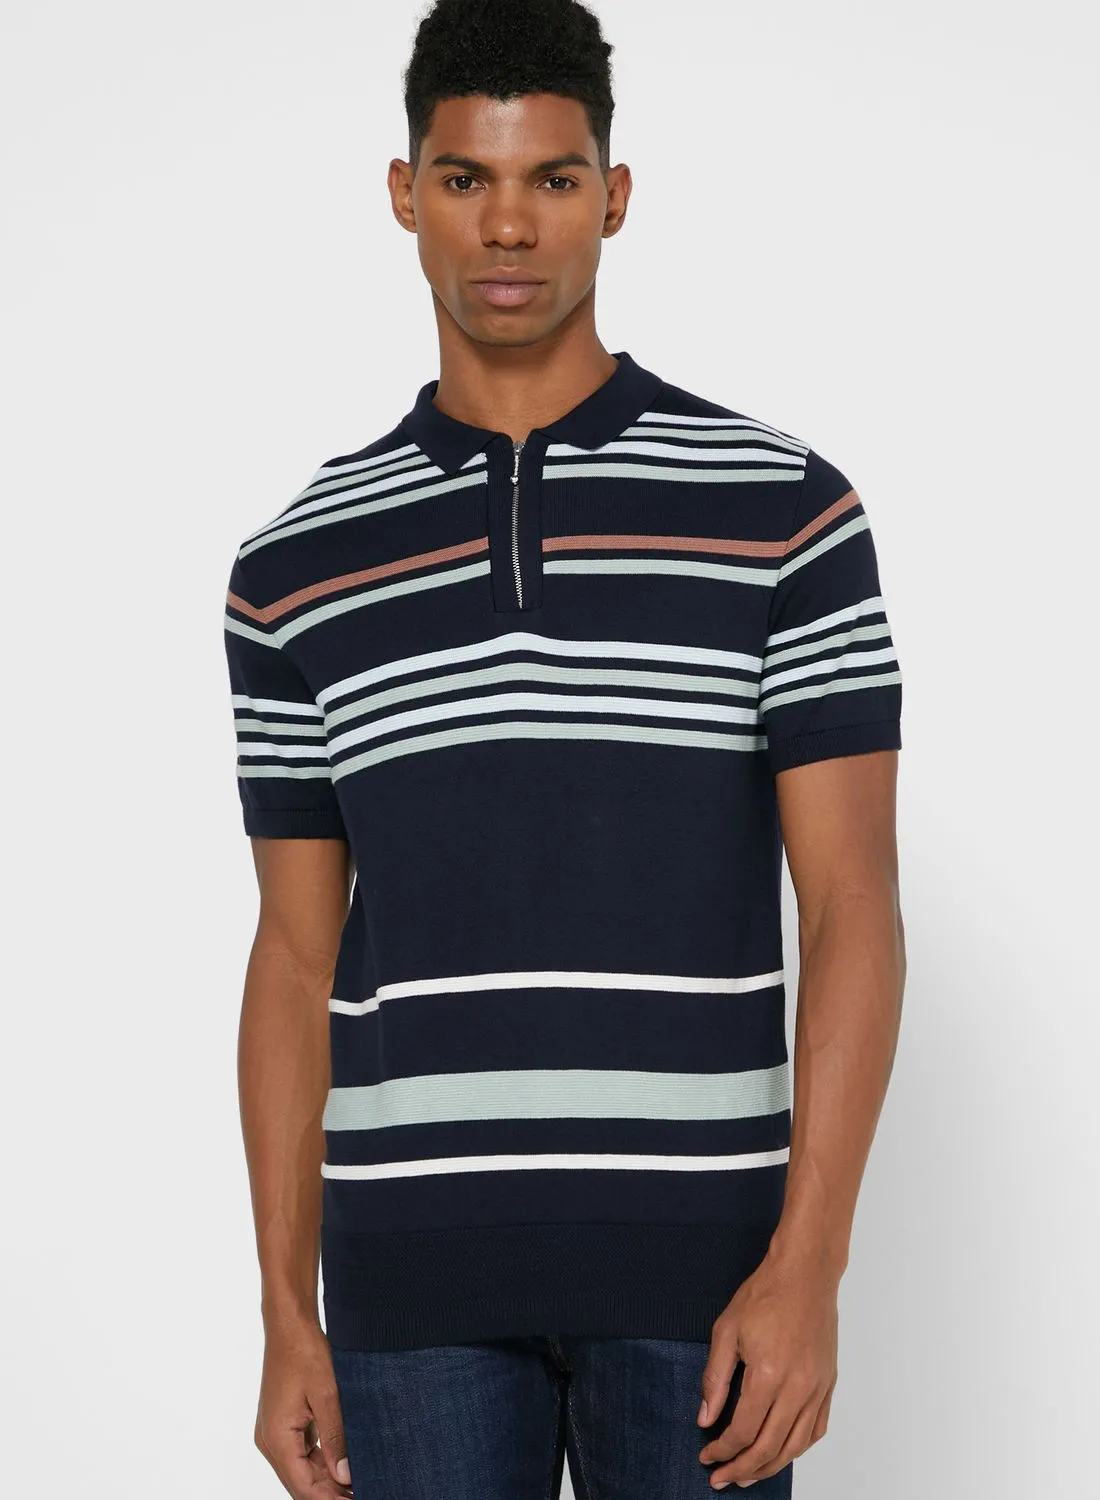 RIVER ISLAND Stripe Detail Knitted Polo